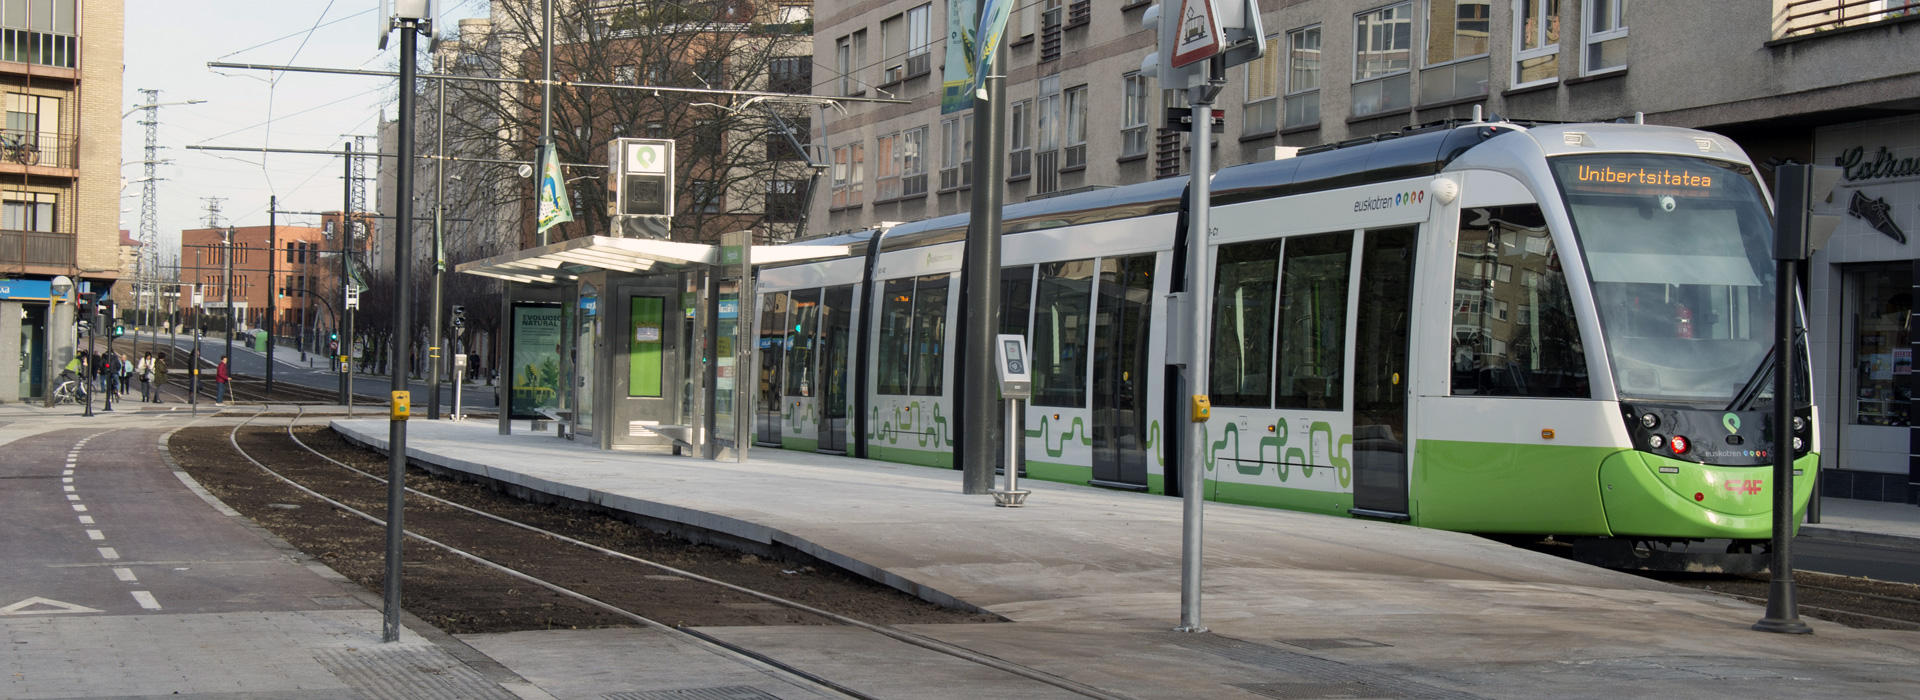 SOUTHERN EXTENSION OF VITORIA-GASTEIZ TRAMWAY TO THE UNIVERSITY - 1